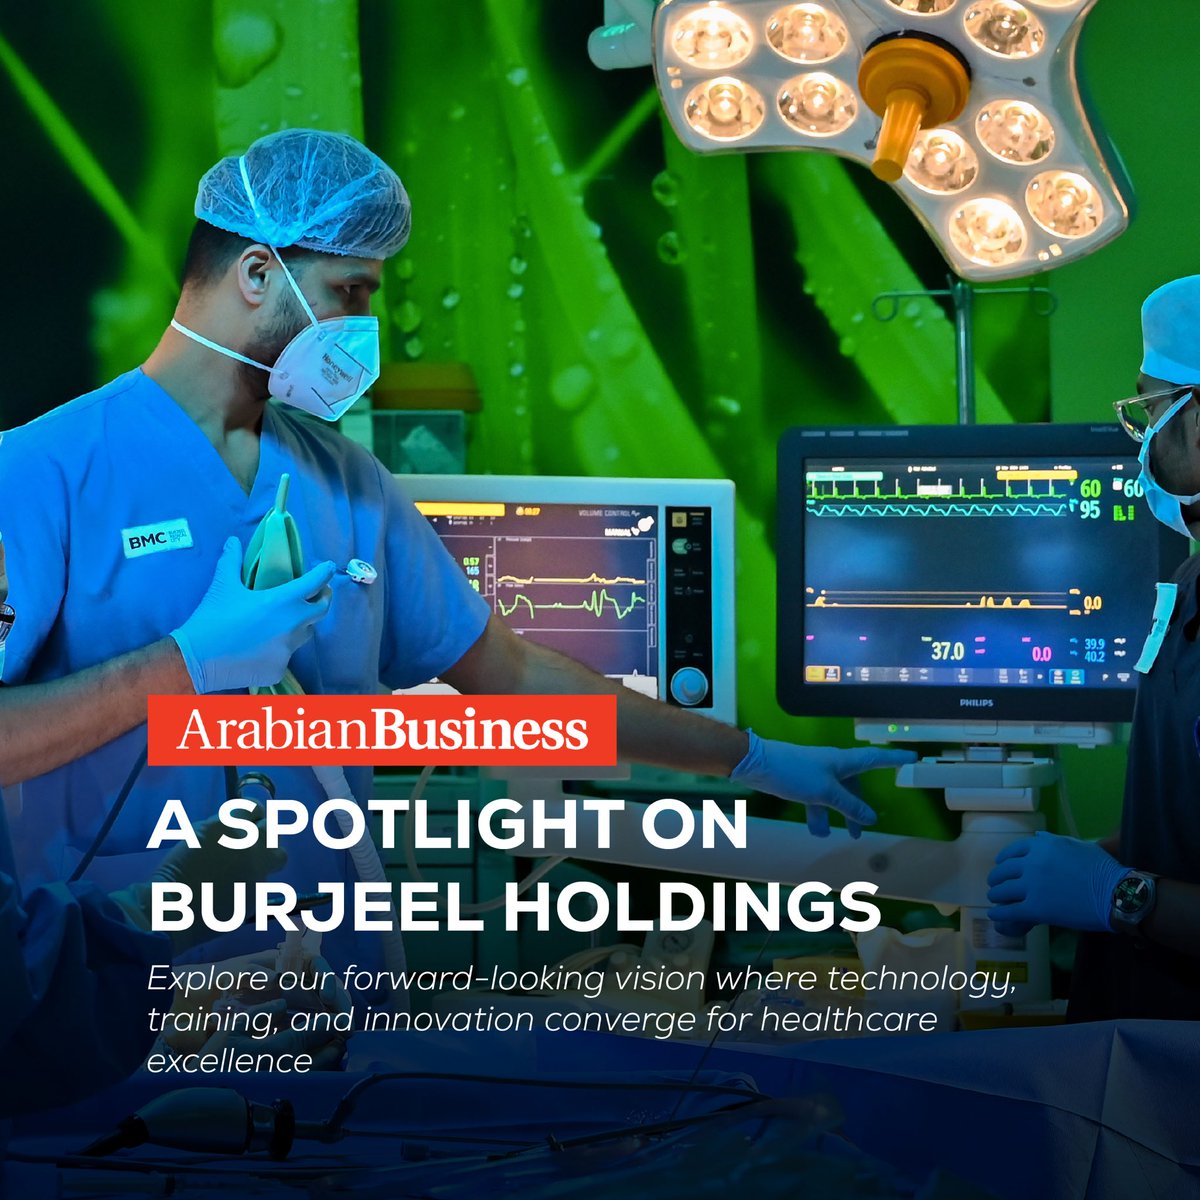 With a forward-looking vision, Burjeel Holdings is dedicated to enhancing our capabilities through technology-driven initiatives, innovative solutions, specialized training programs, and academic advancements. Read about how we are prioritizing these areas on our journey towards…